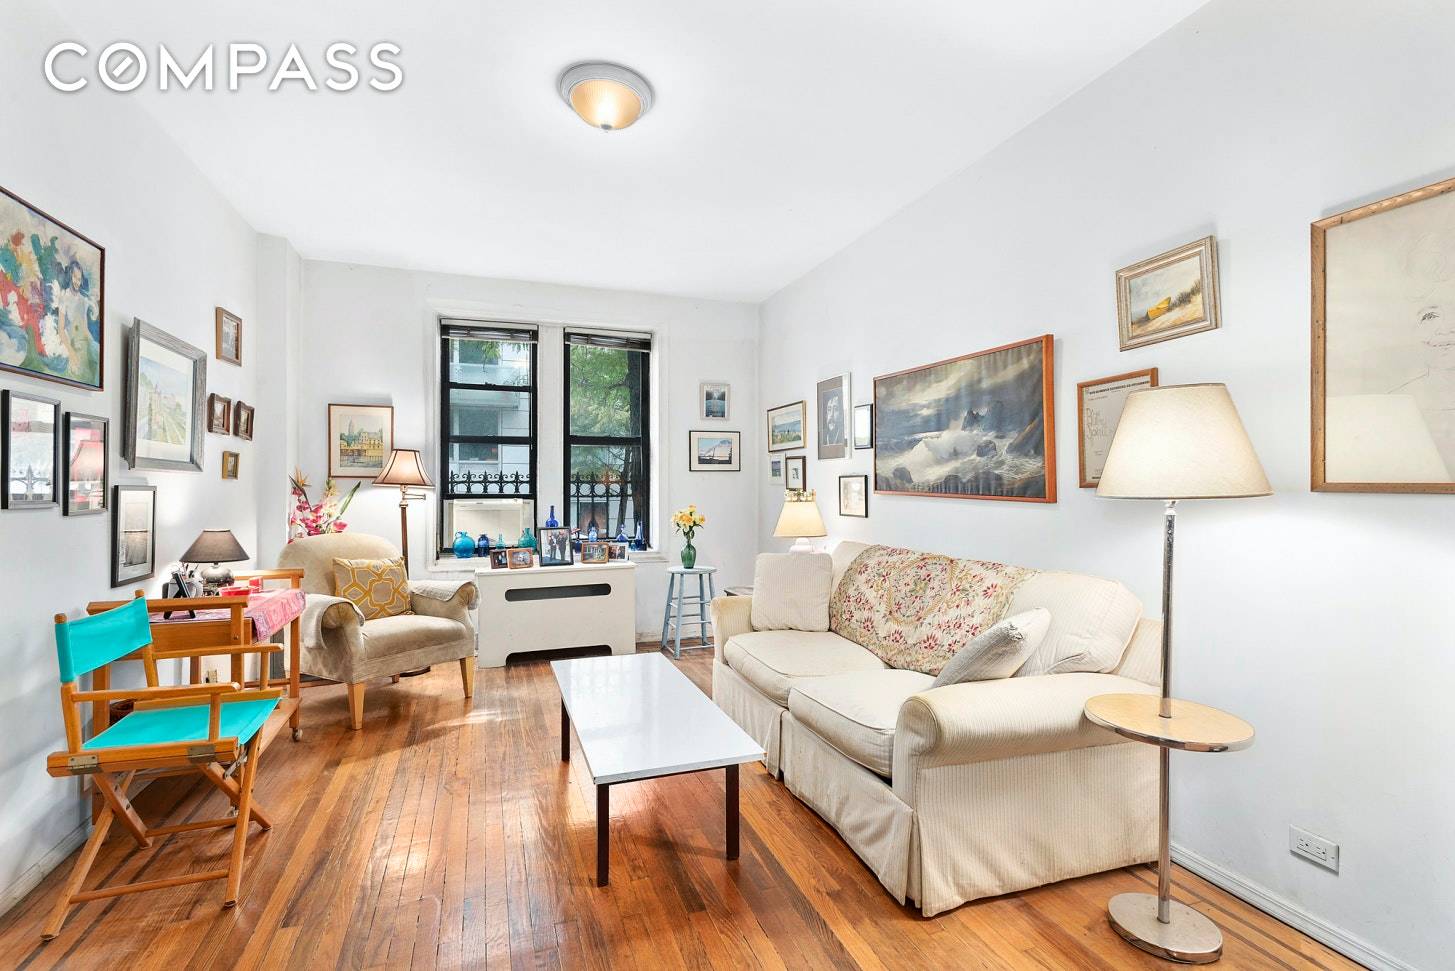 MAKE AN OFFER ESTATE MUST SELL GREAT UPSIDE renovation potential on prime Hell's Kitchen block.